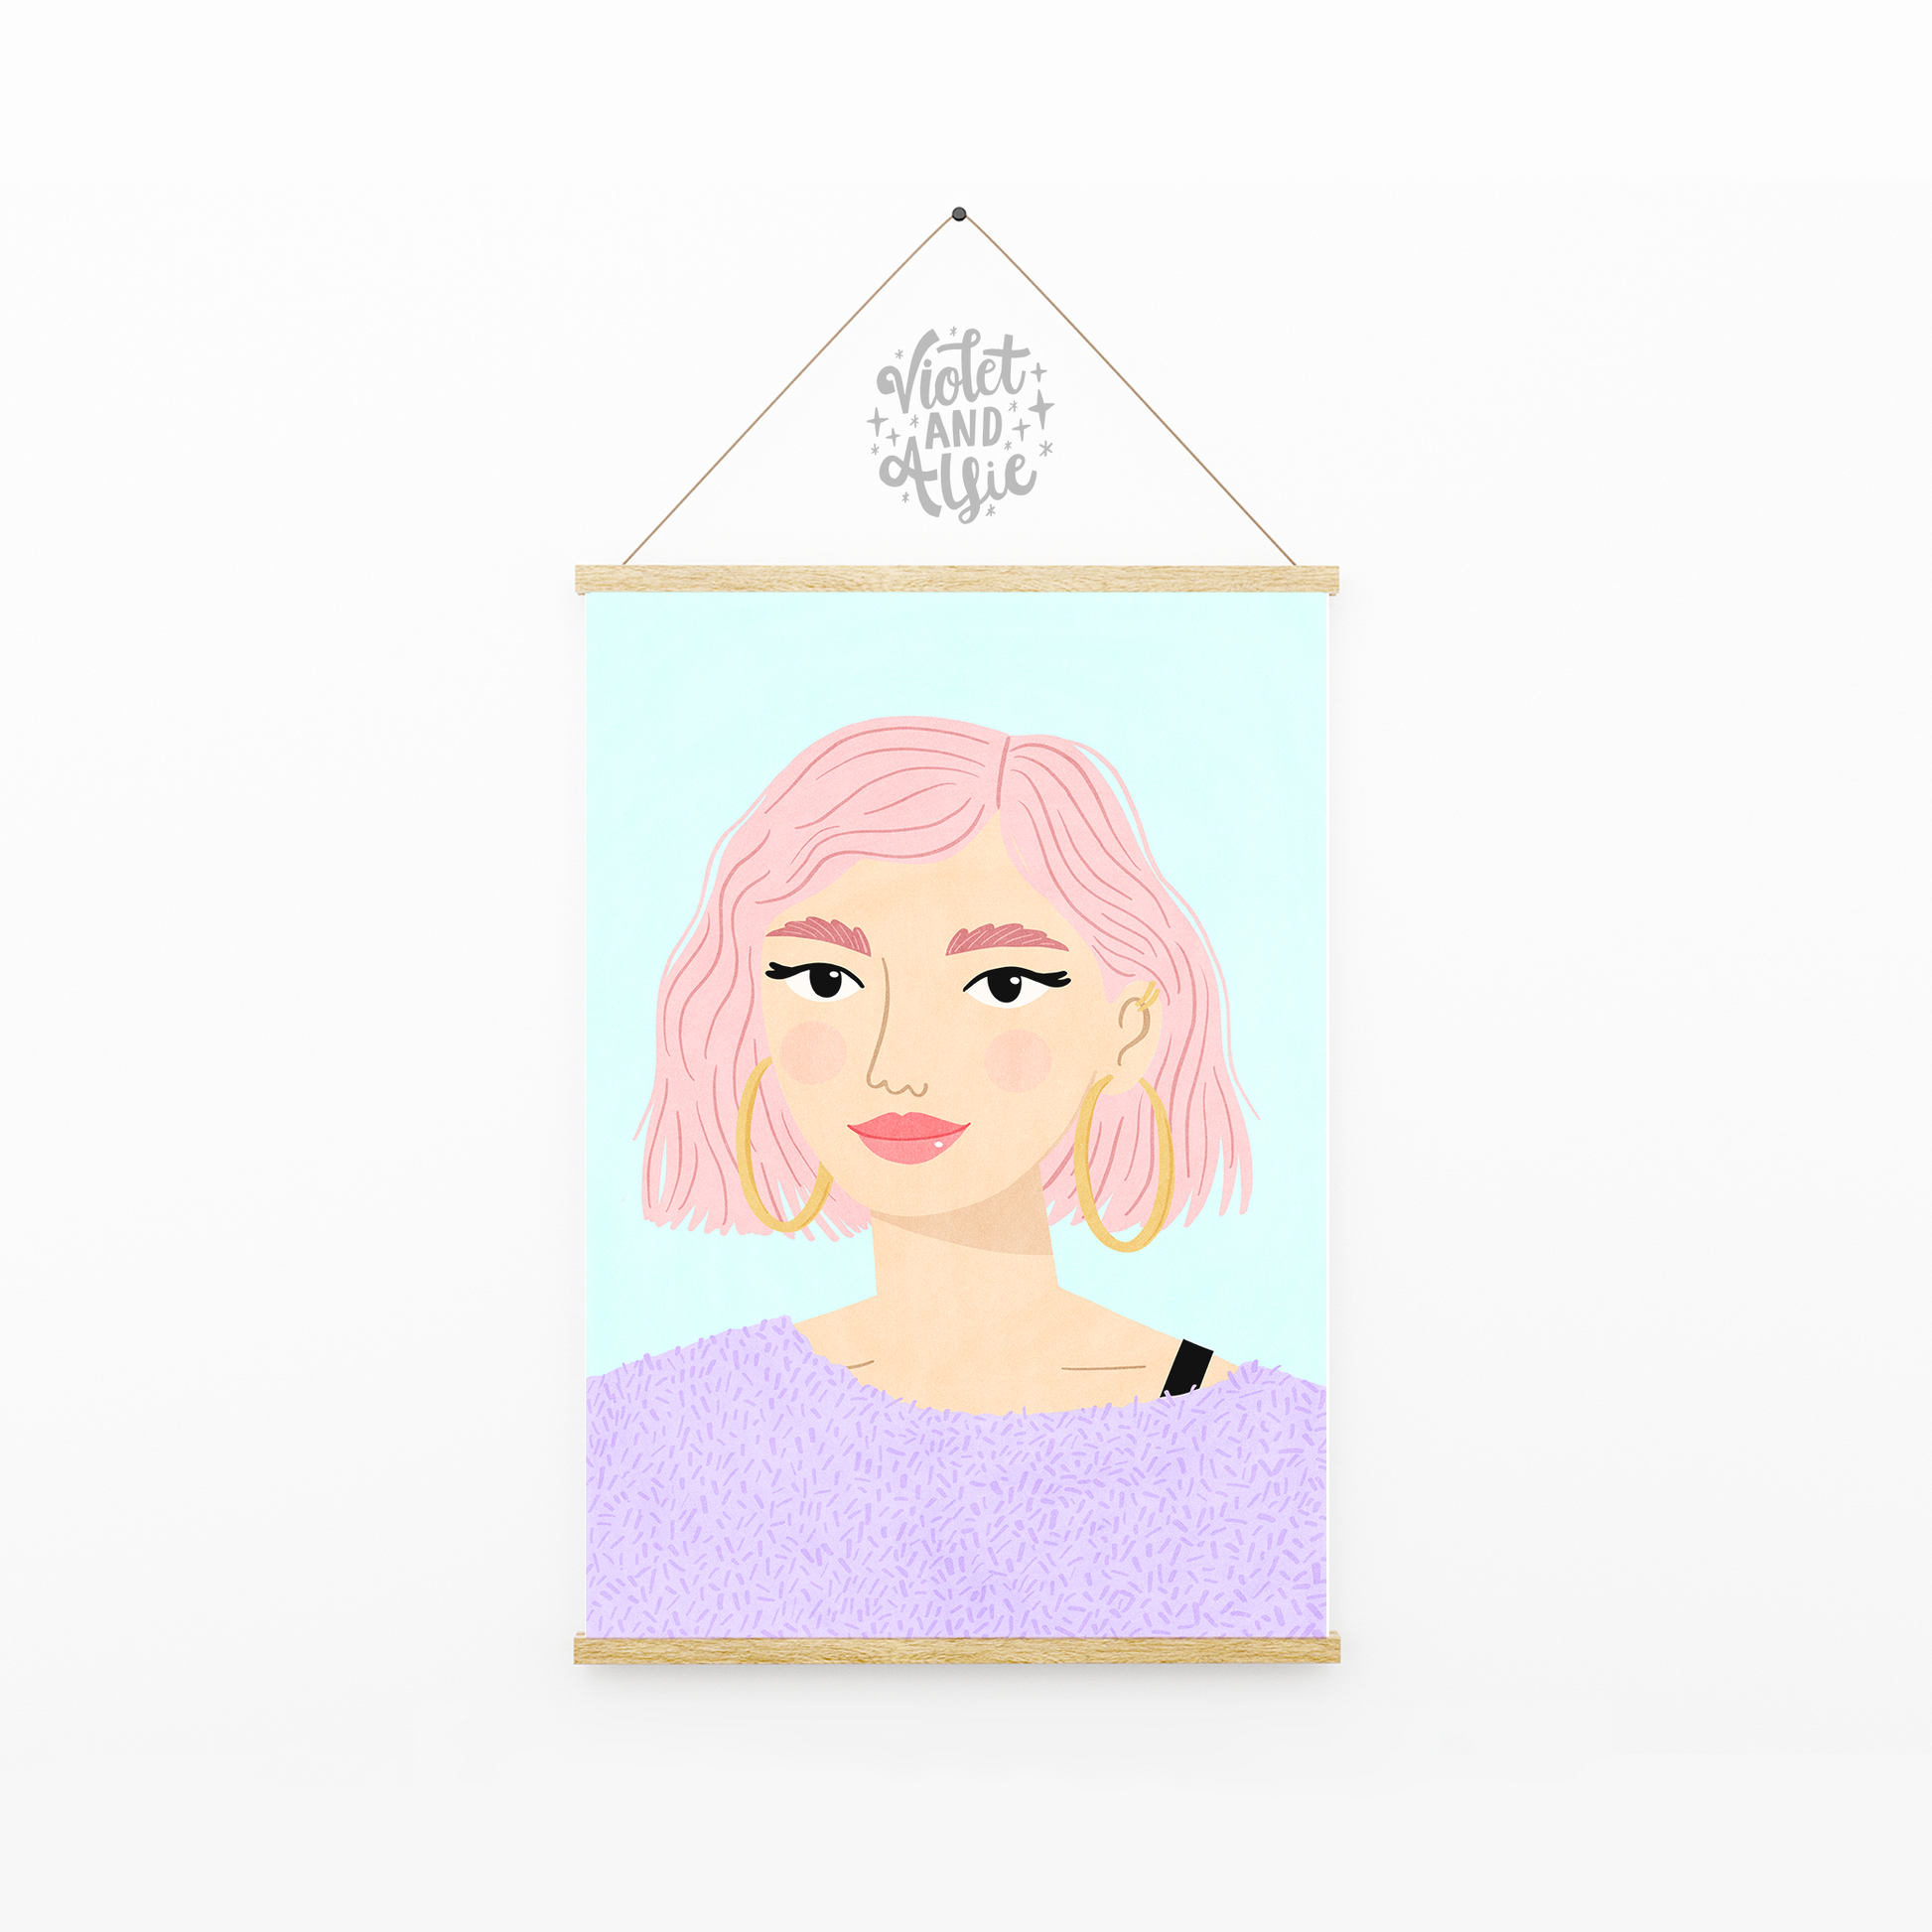 Pink hair print, cool wall art, girl's room decor prints, quirky wall art, colourful home decor, maximalist prints, gallery wall art prints, girl portrait, lilac mint pink